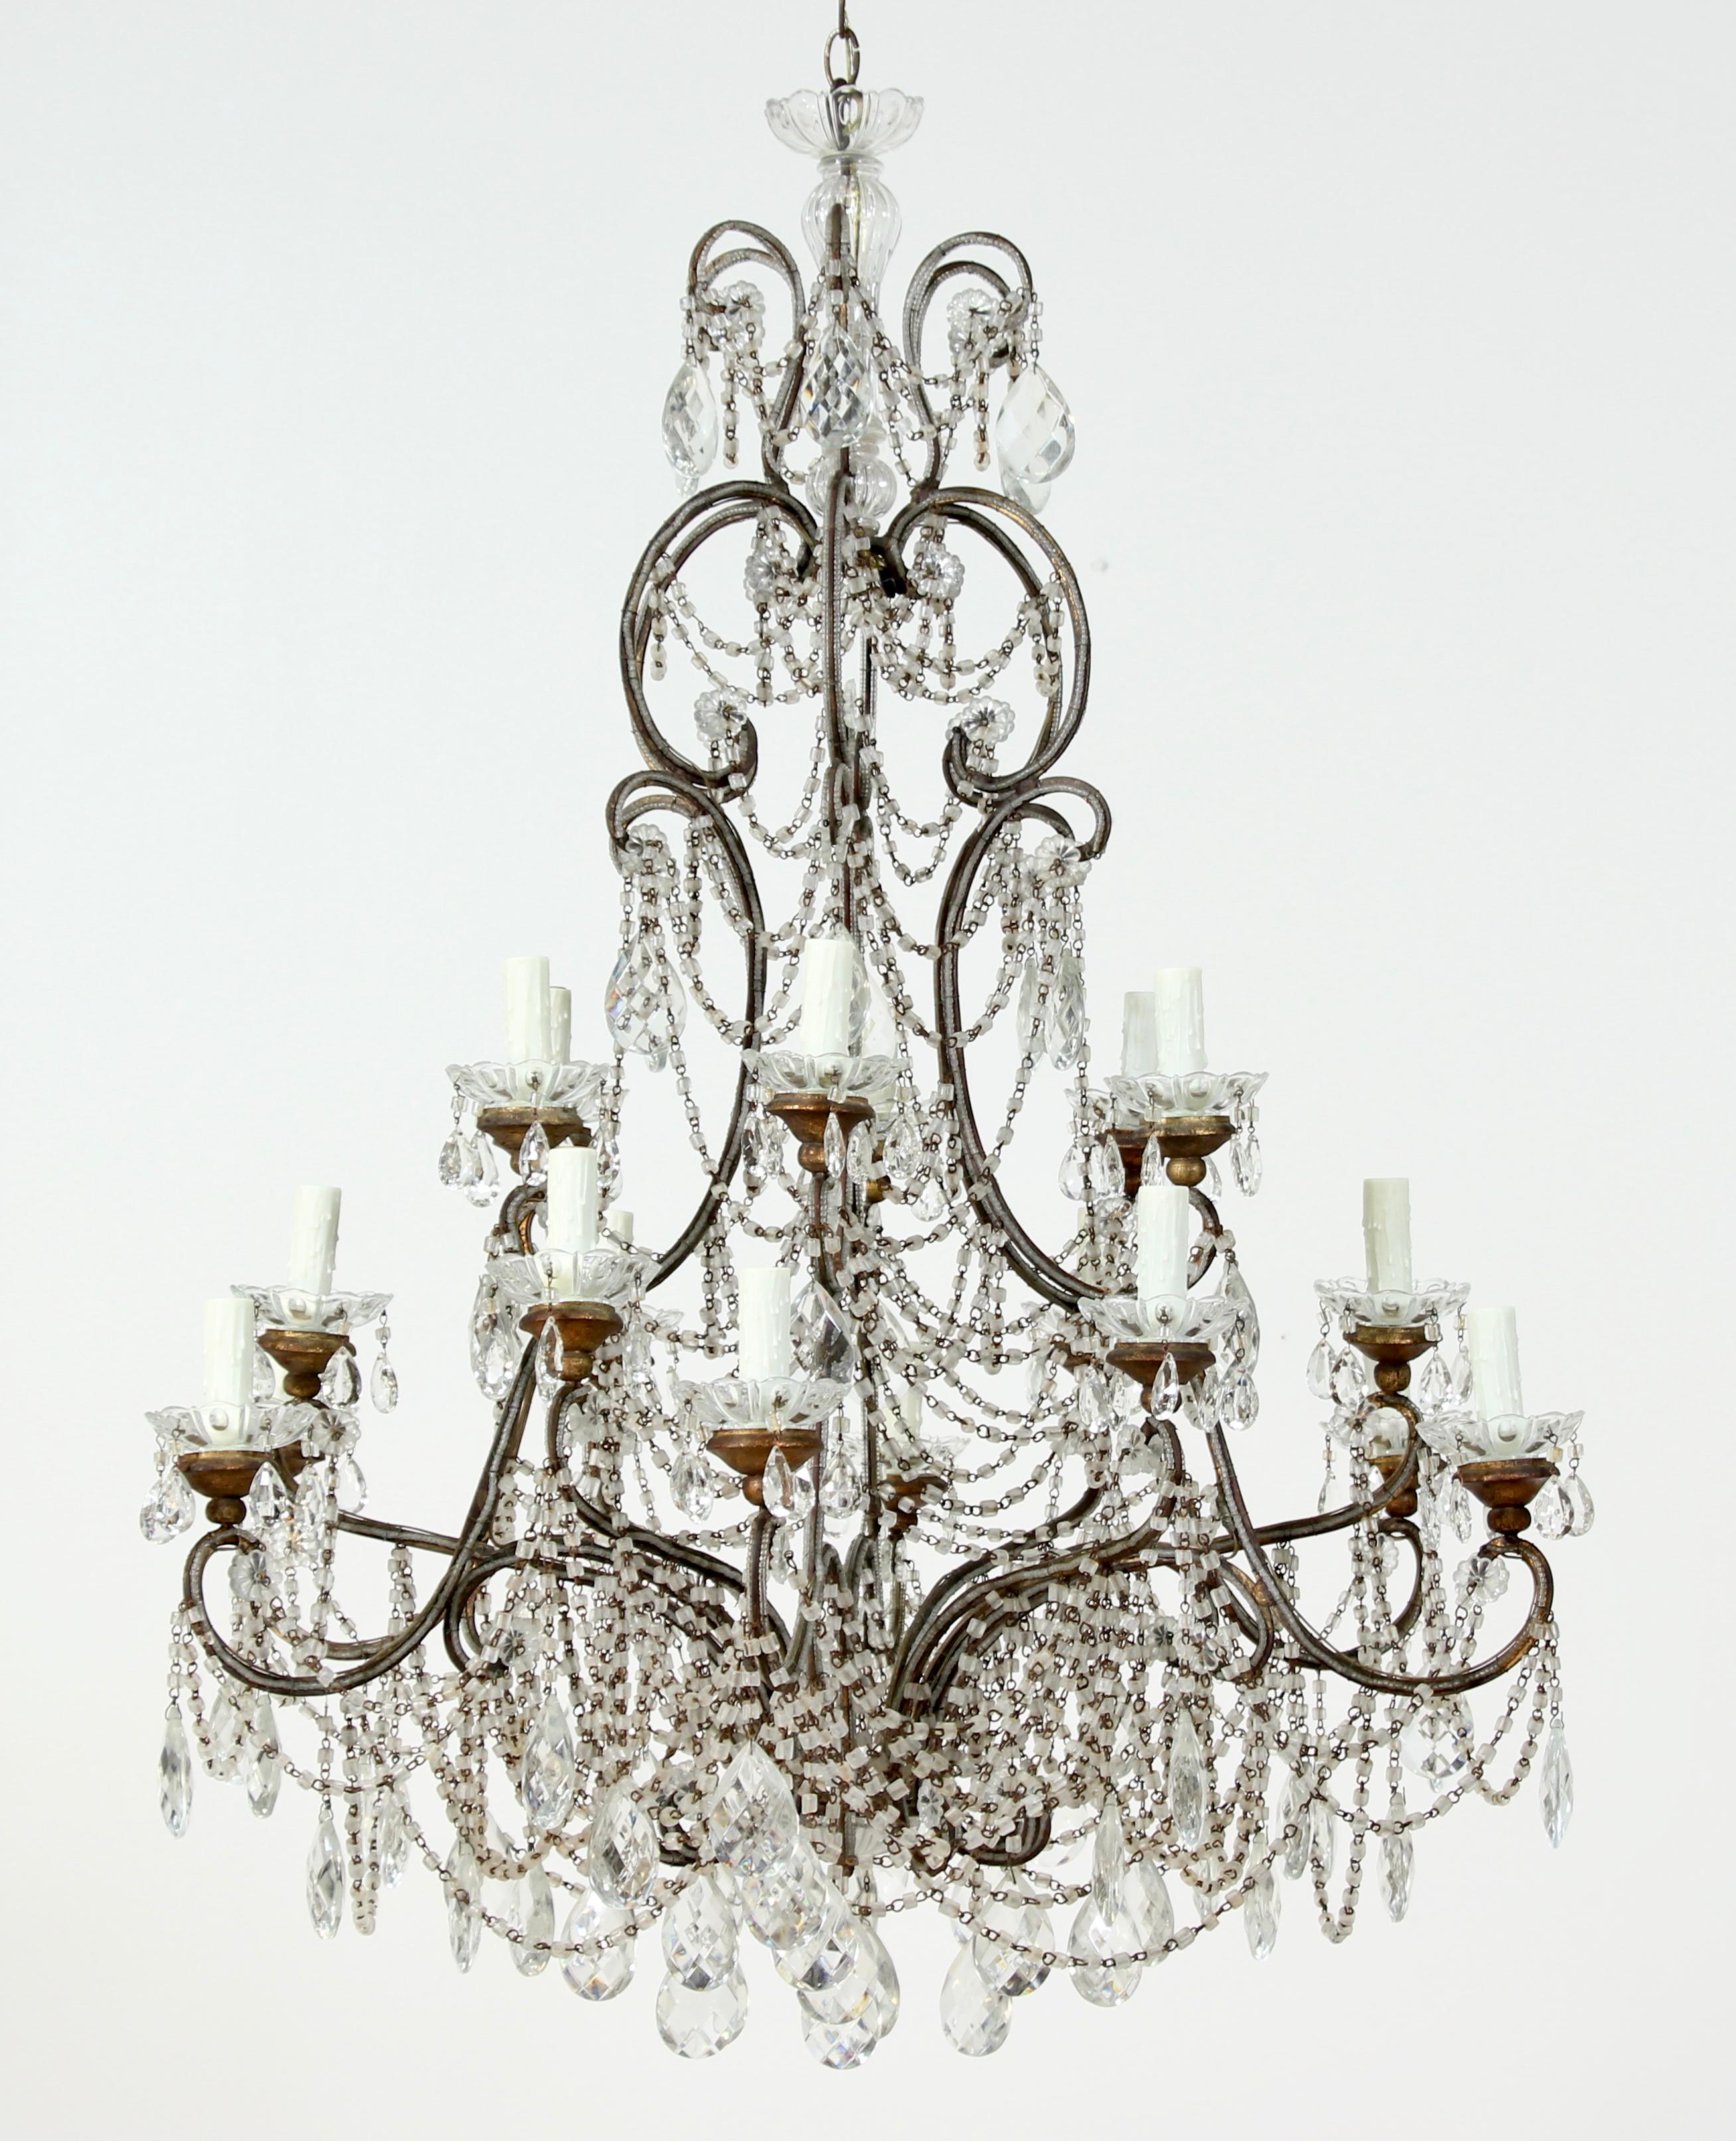 Glorious, 1920s Italian 18-light gilt-iron and crystal beaded chandelier. The chandelier’s gilt-iron frame is all hand beaded and features a beautiful time-worn patina. Each of the chandelier’s 18 glass bobeche rest on giltwood mounts. A generous